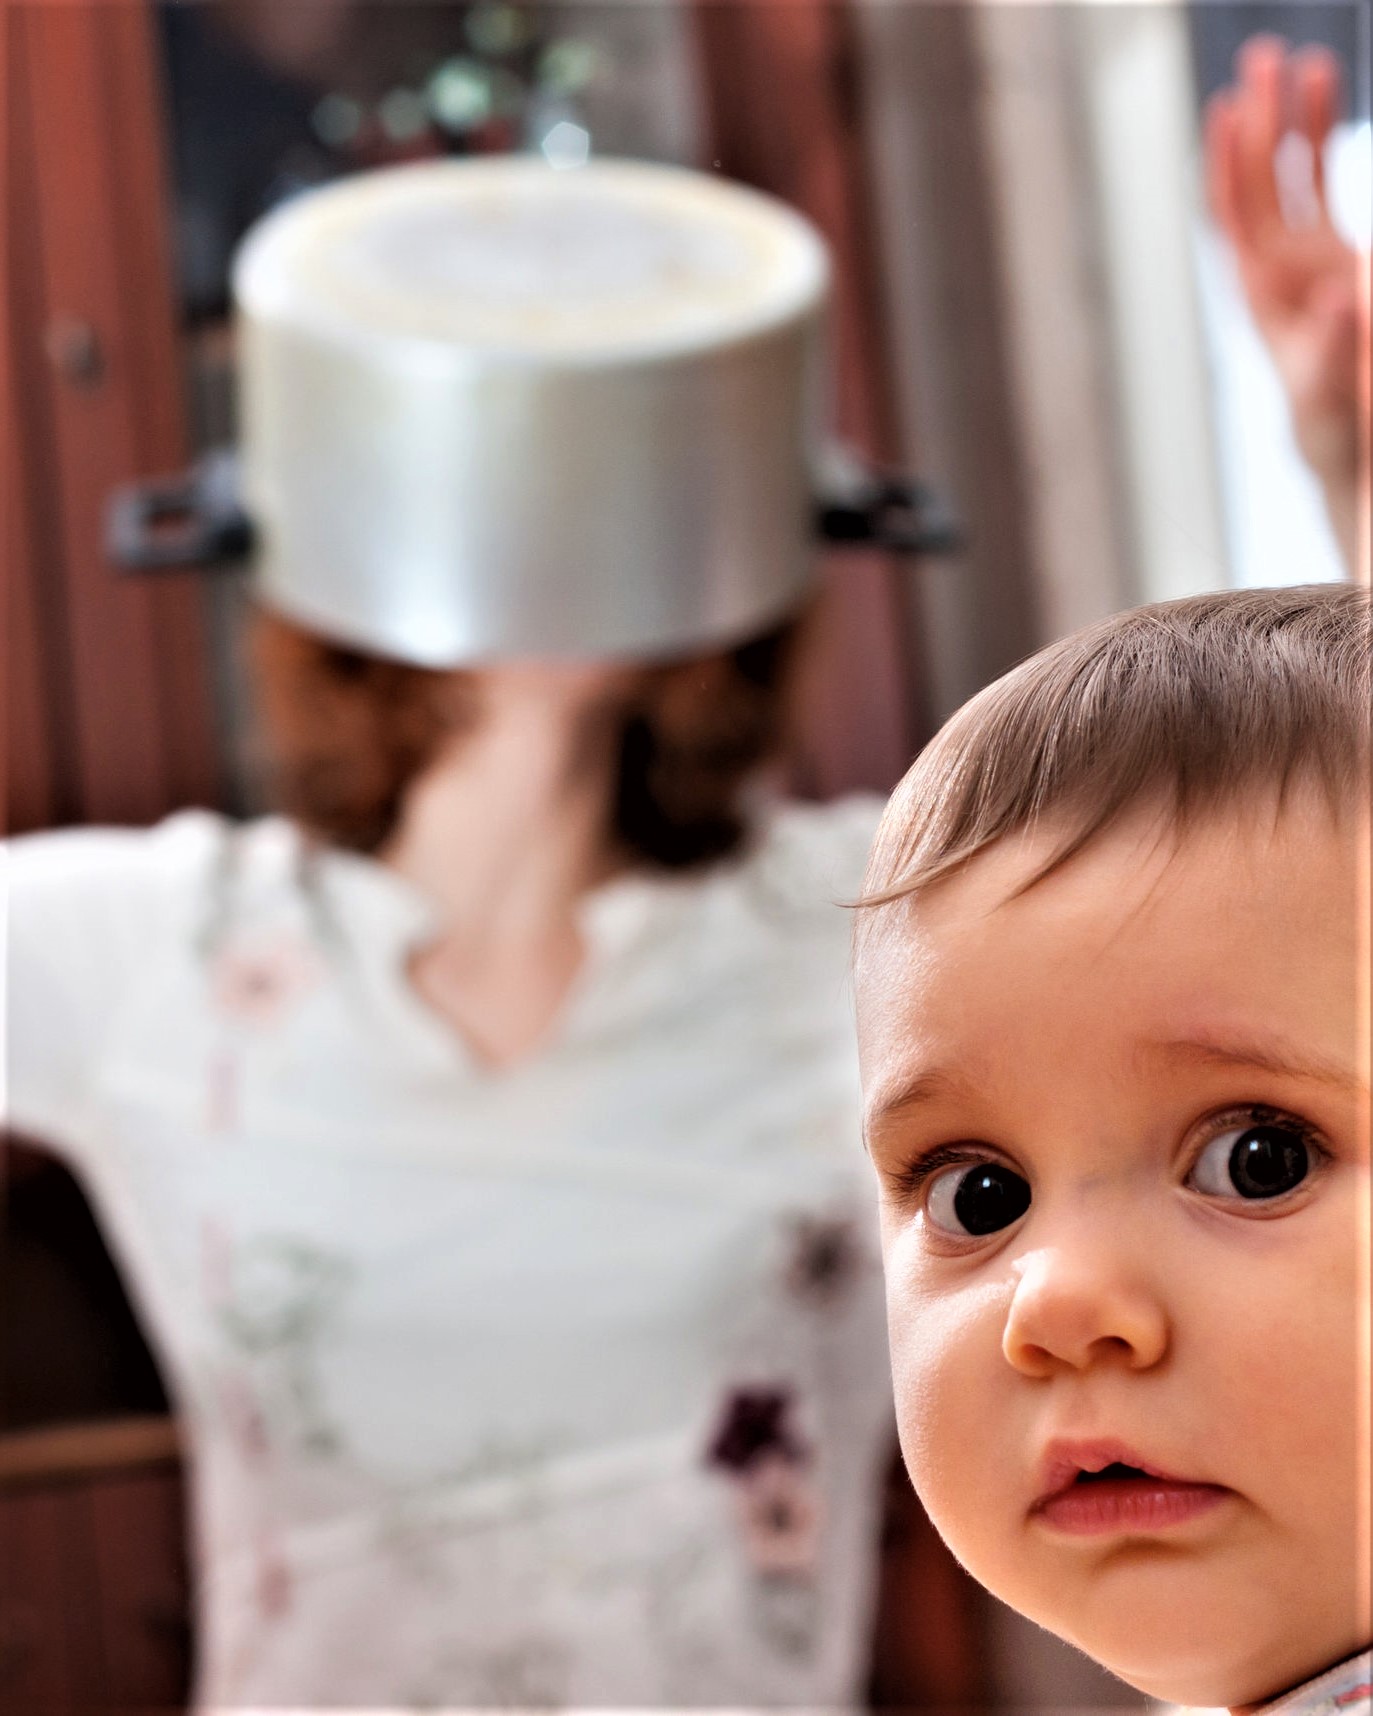 Mom with pot on head with worried child